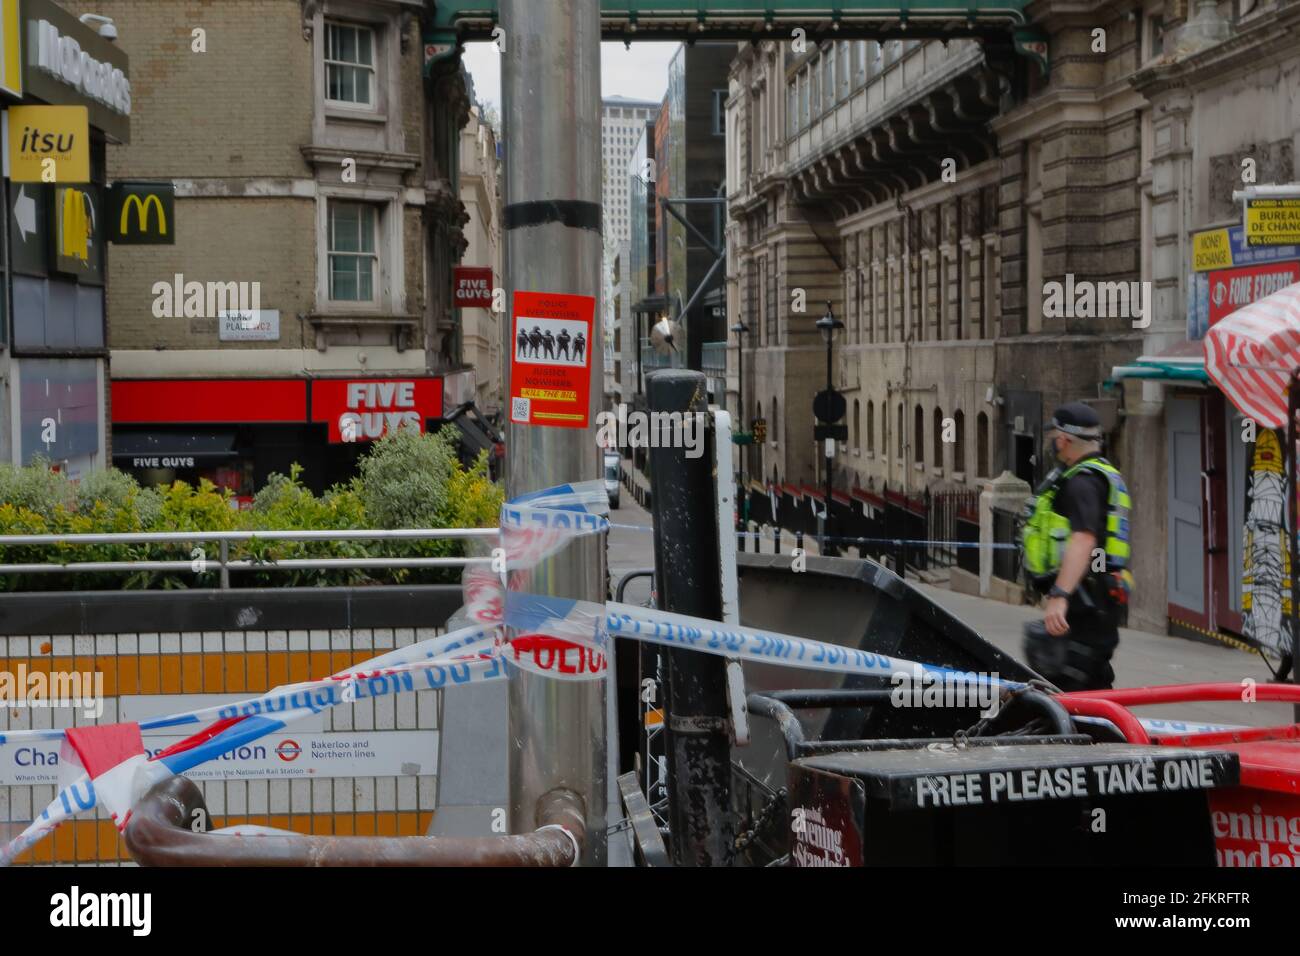 London (UK), 03 May 2021:Charing Cross Station is evacuated and closed after 'emergency incident' where police attended to a suspicious package in nea Stock Photo